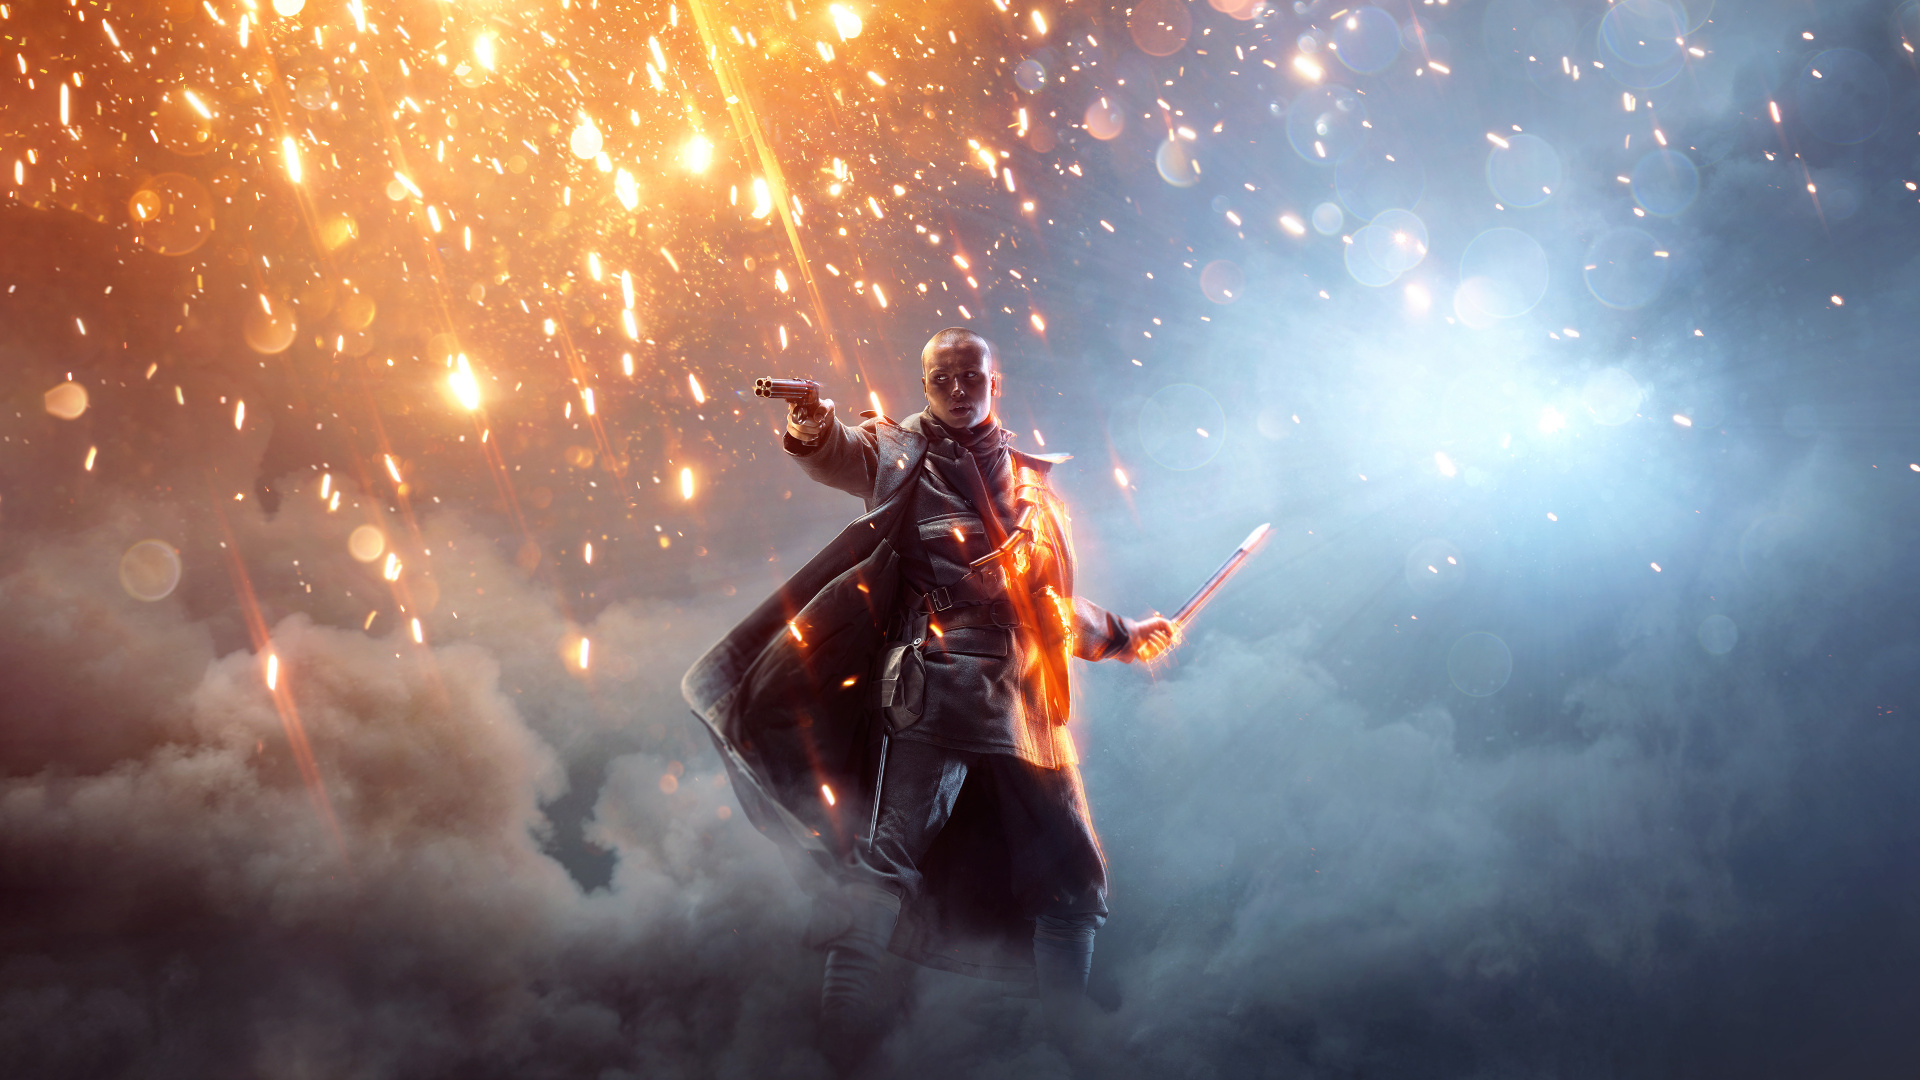 Battlefield 1, Electronic Arts, Space, Fictional Character, Darkness. Wallpaper in 1920x1080 Resolution